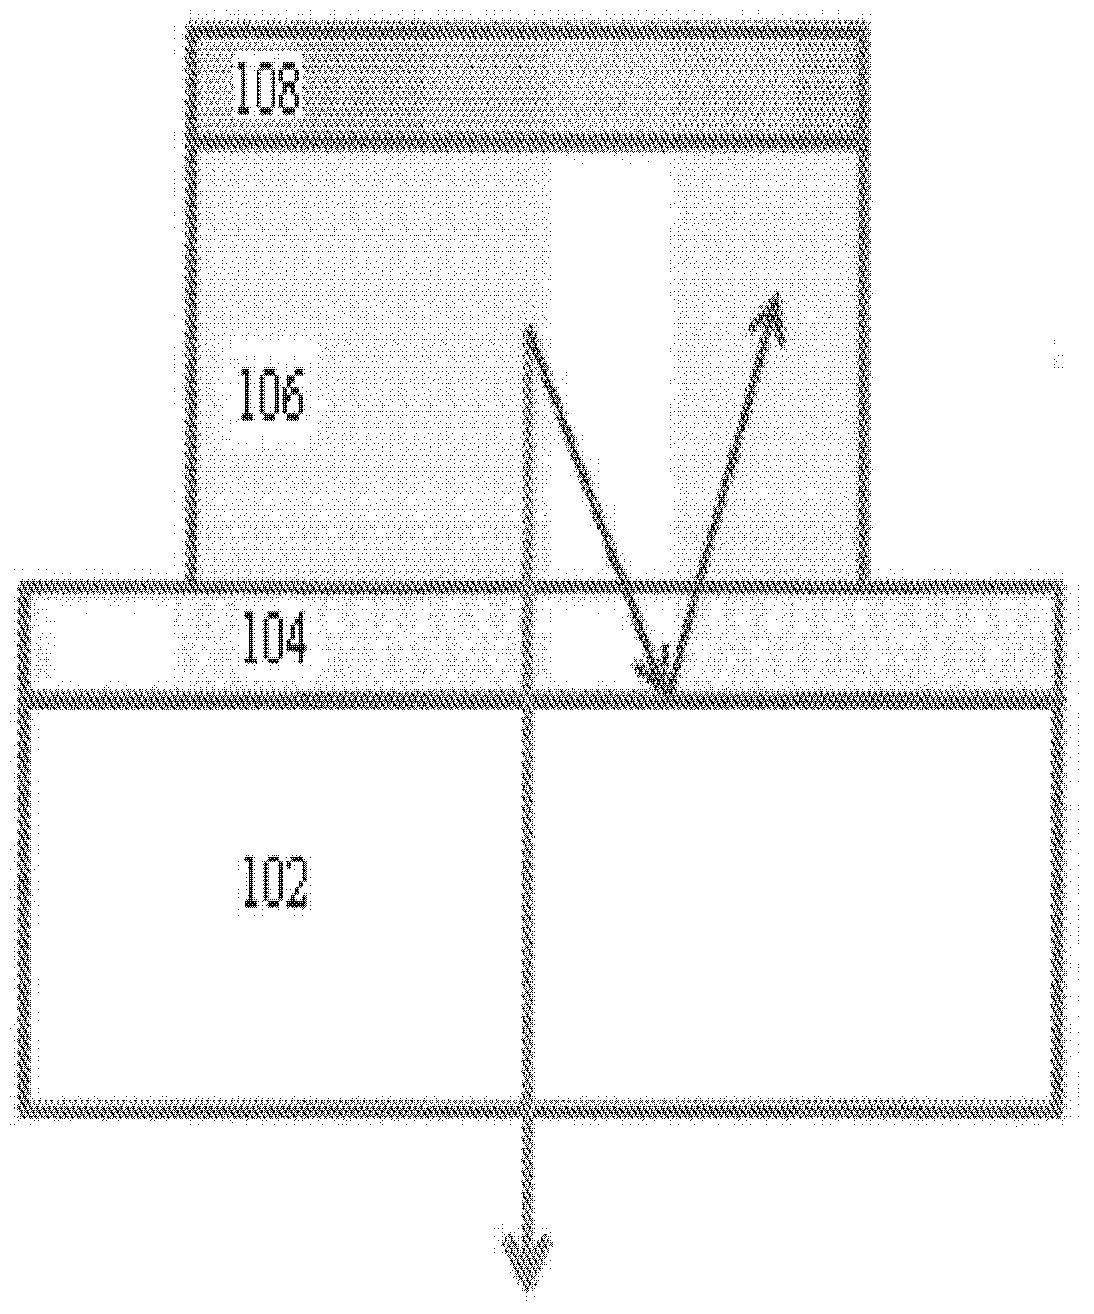 Internal optical extraction layer for OLED devices